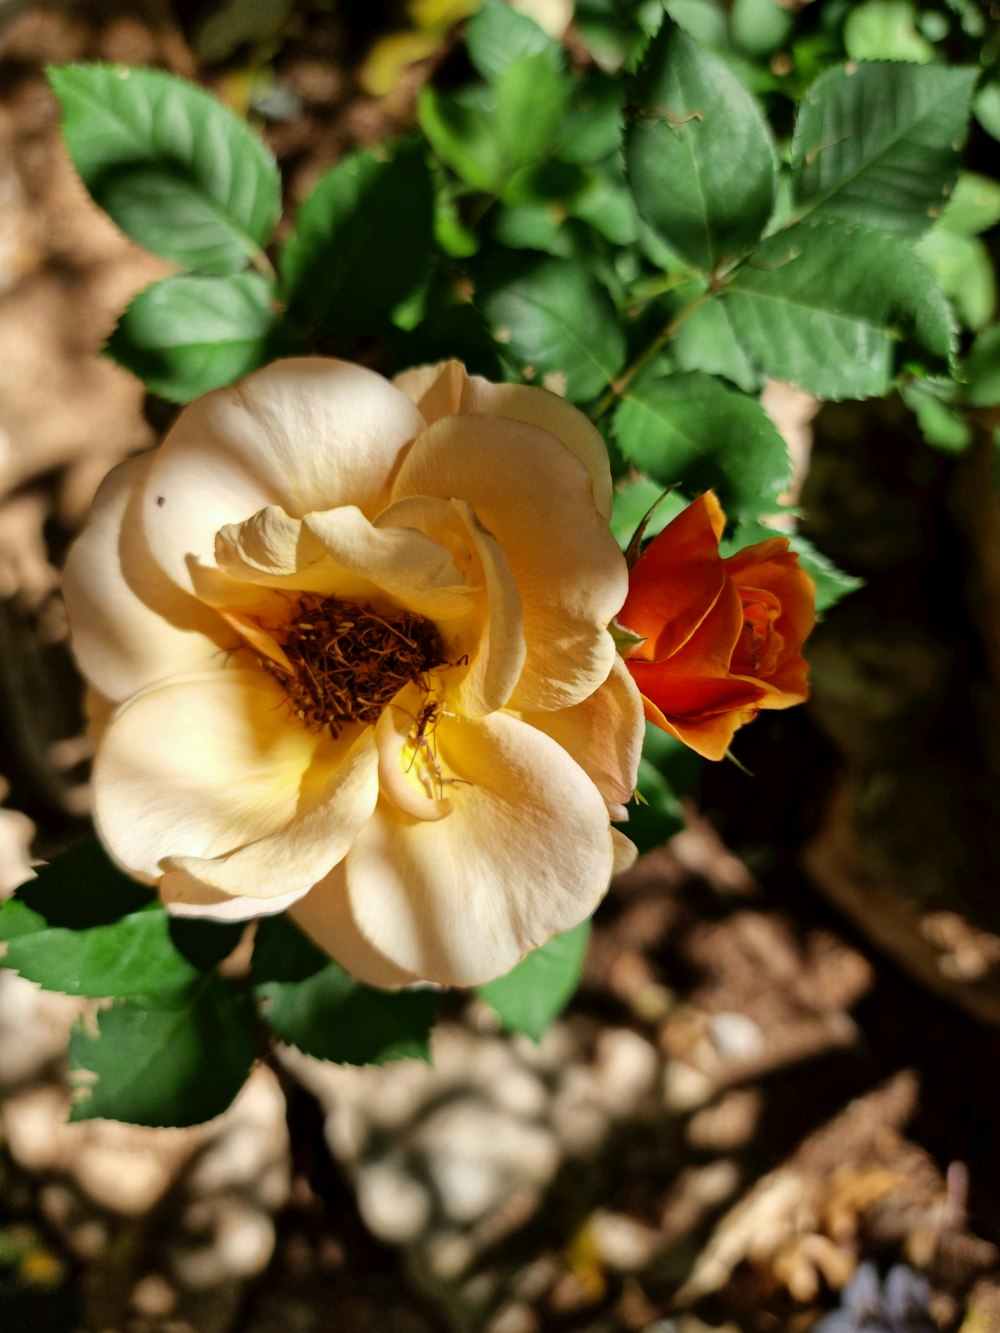 a white and orange flower with green leaves